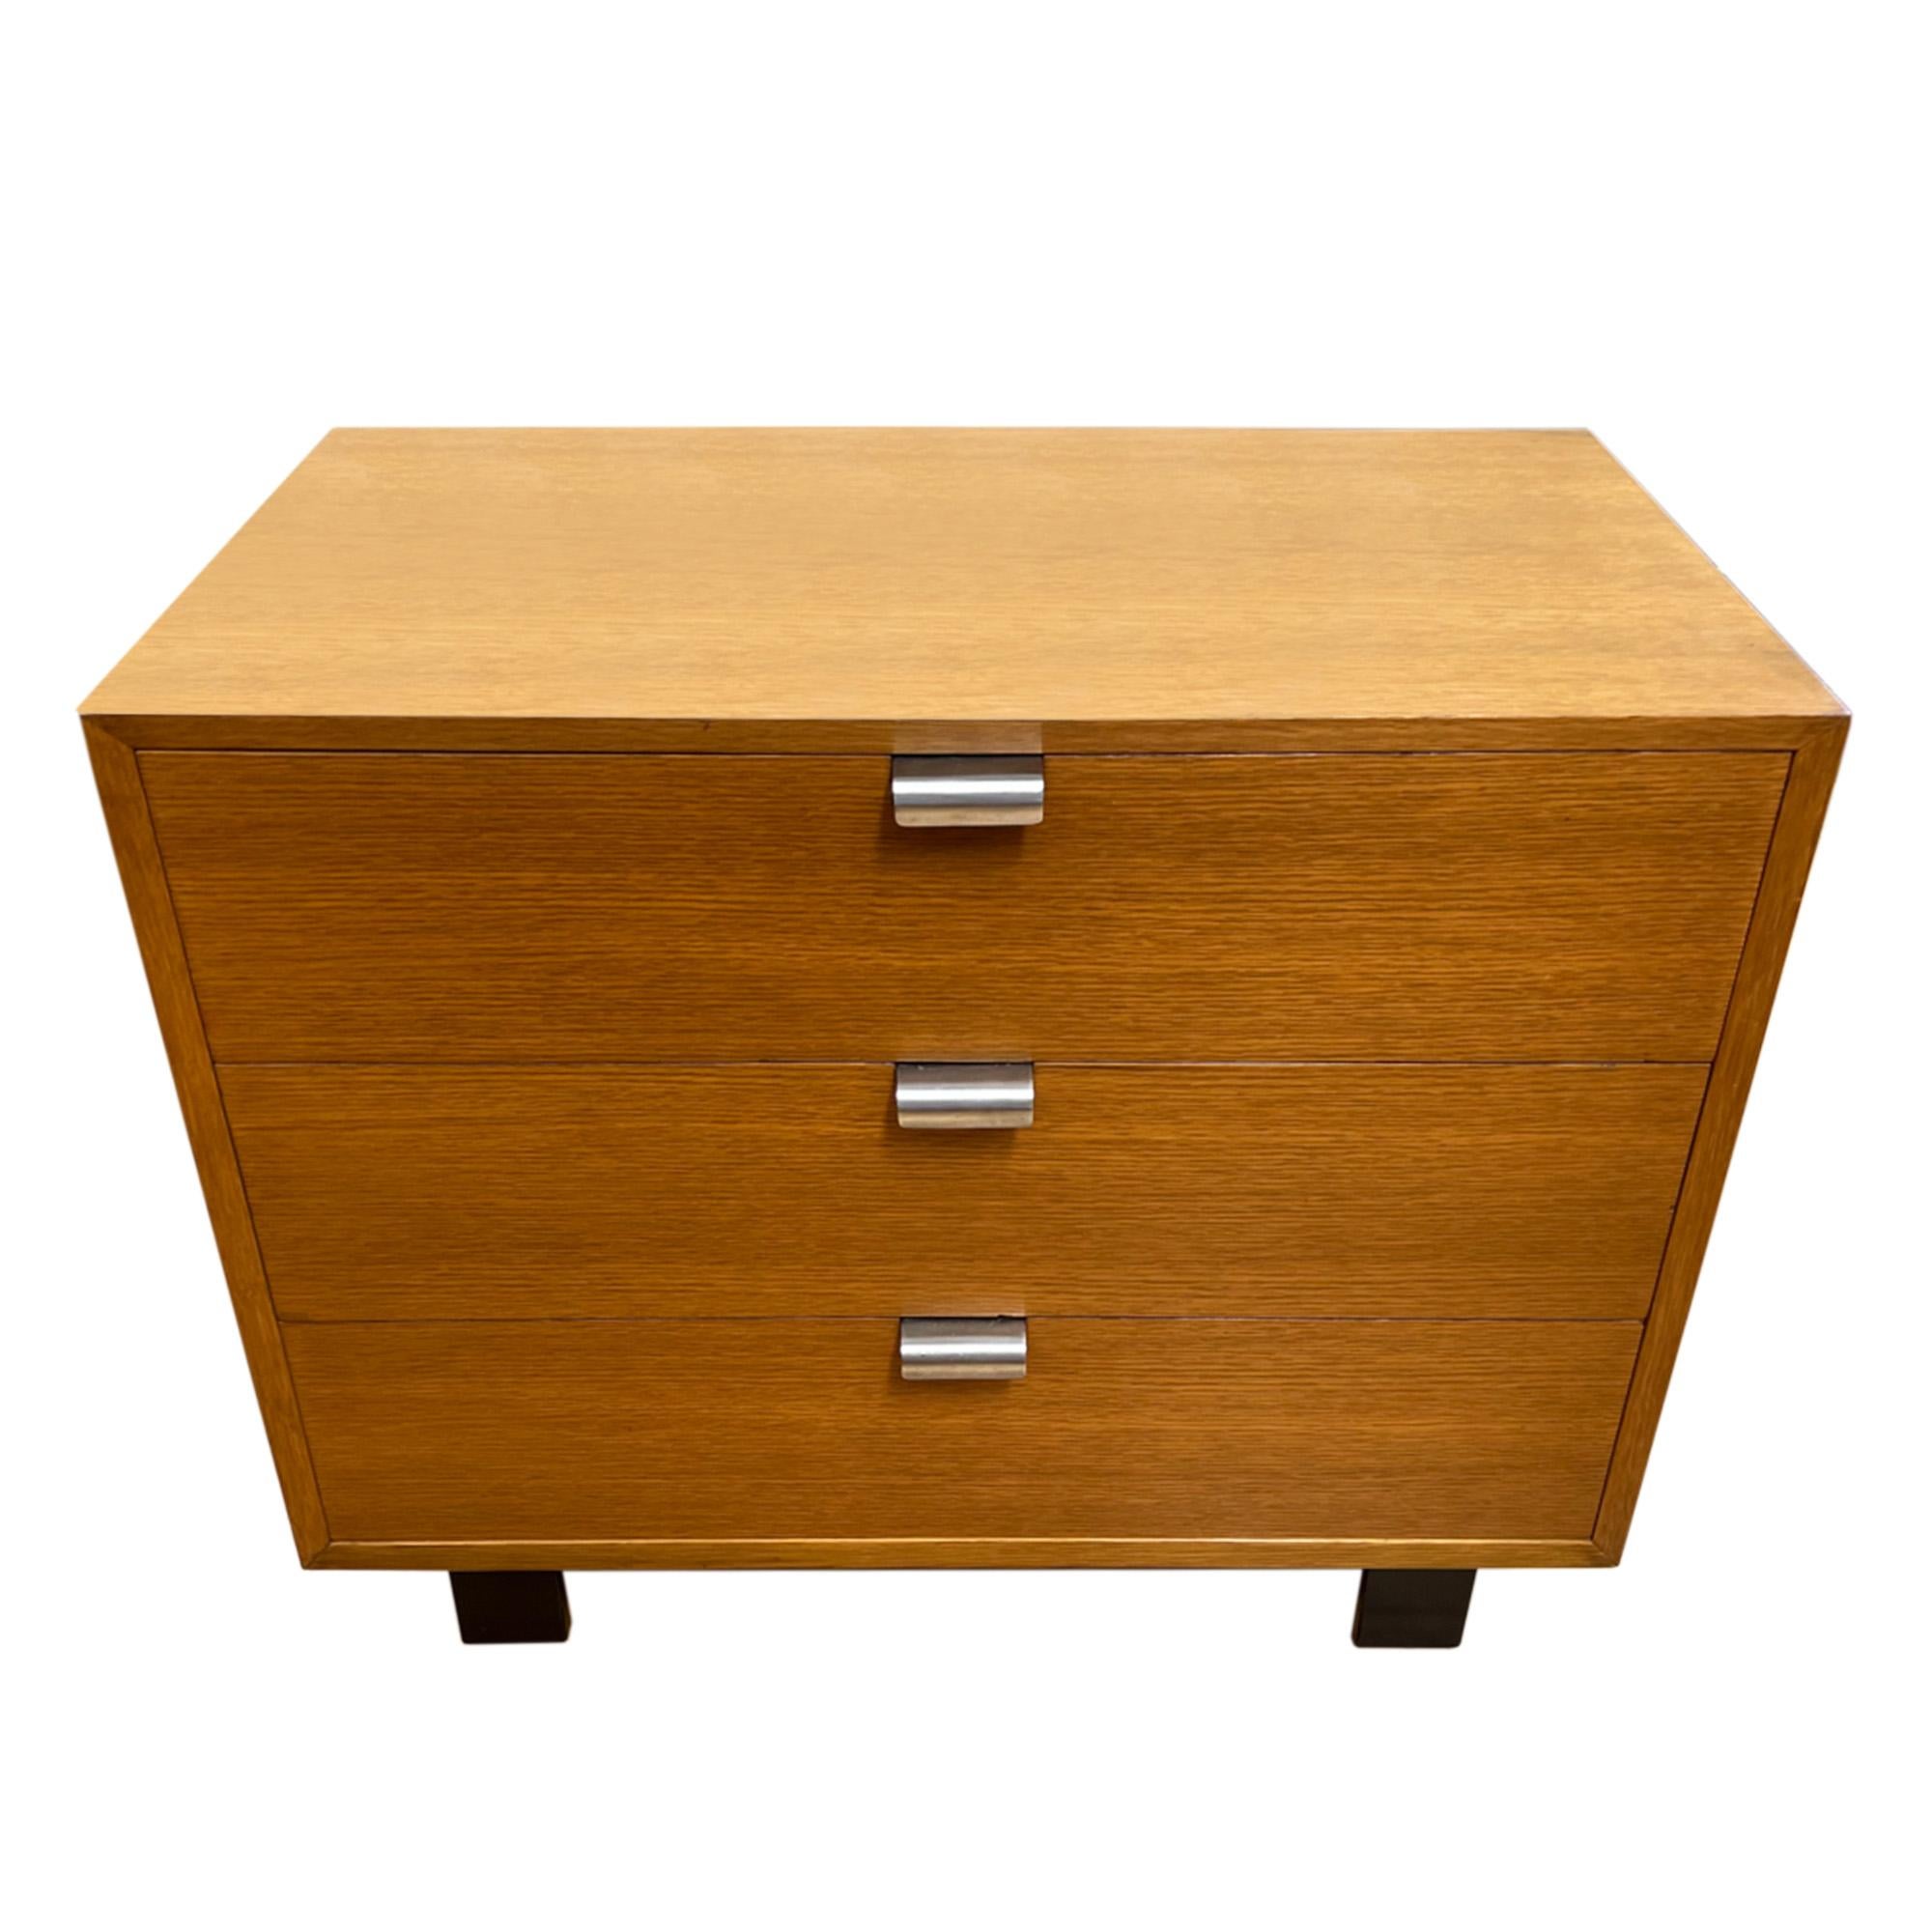 Made in the United States in middle of the 20th century, this pair of chests are a design classic by George Nelson for Herman Miller. 

One has three drawers and the other four - please take a look at all our pictures for a closer look. 

Classic